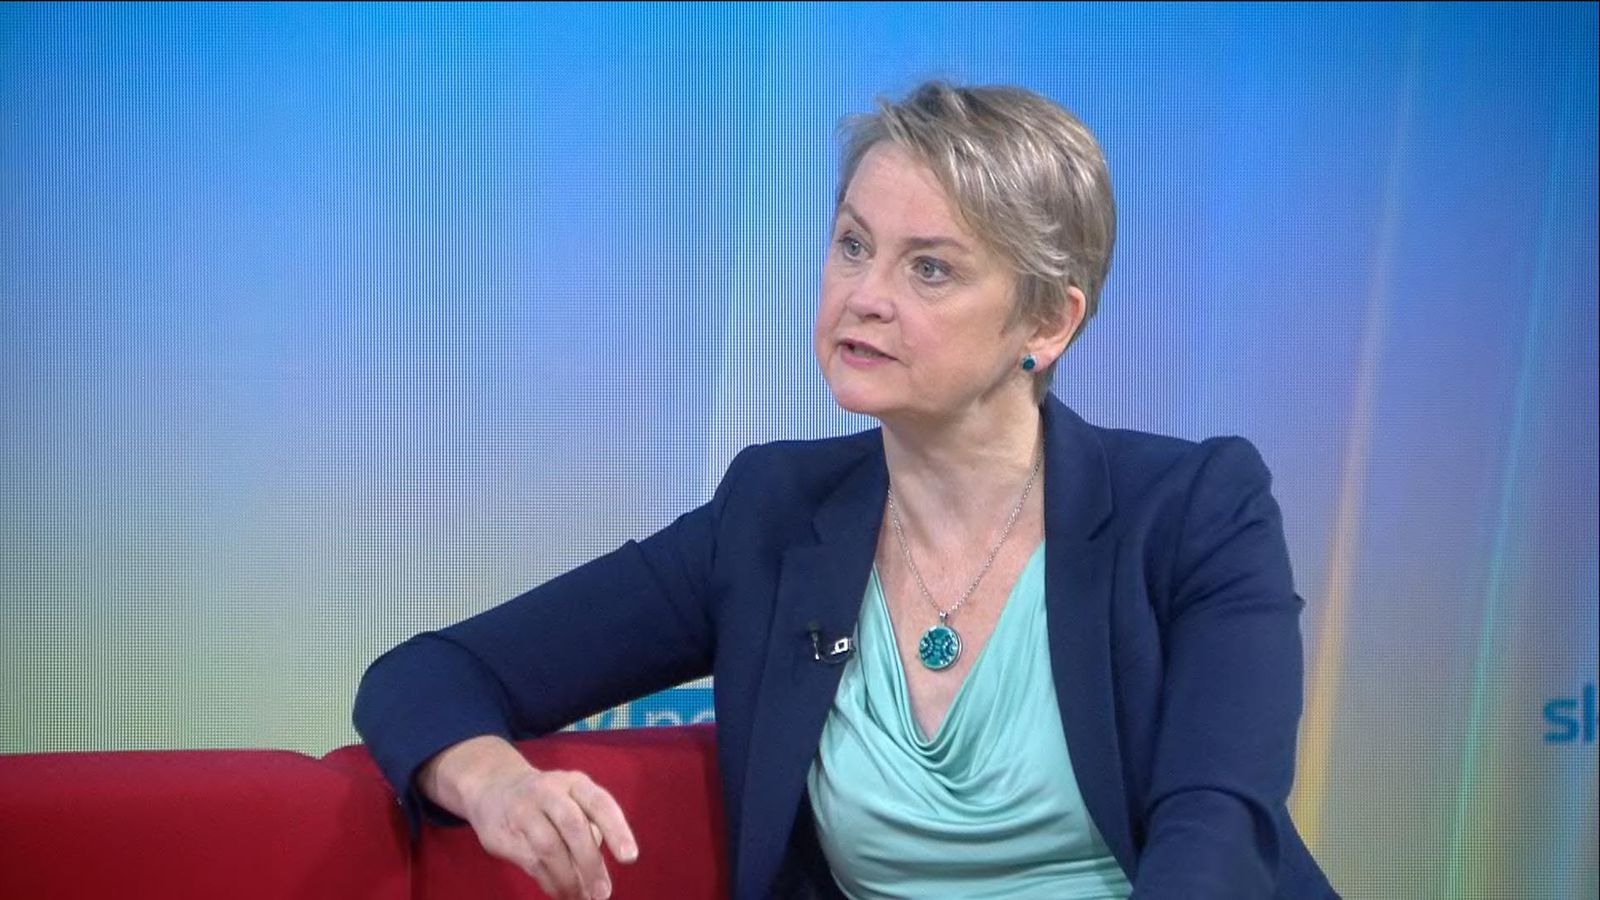 Two-child benefit cap: Yvette Cooper refuses to say if she backs Labour's decision to keep controversial policy